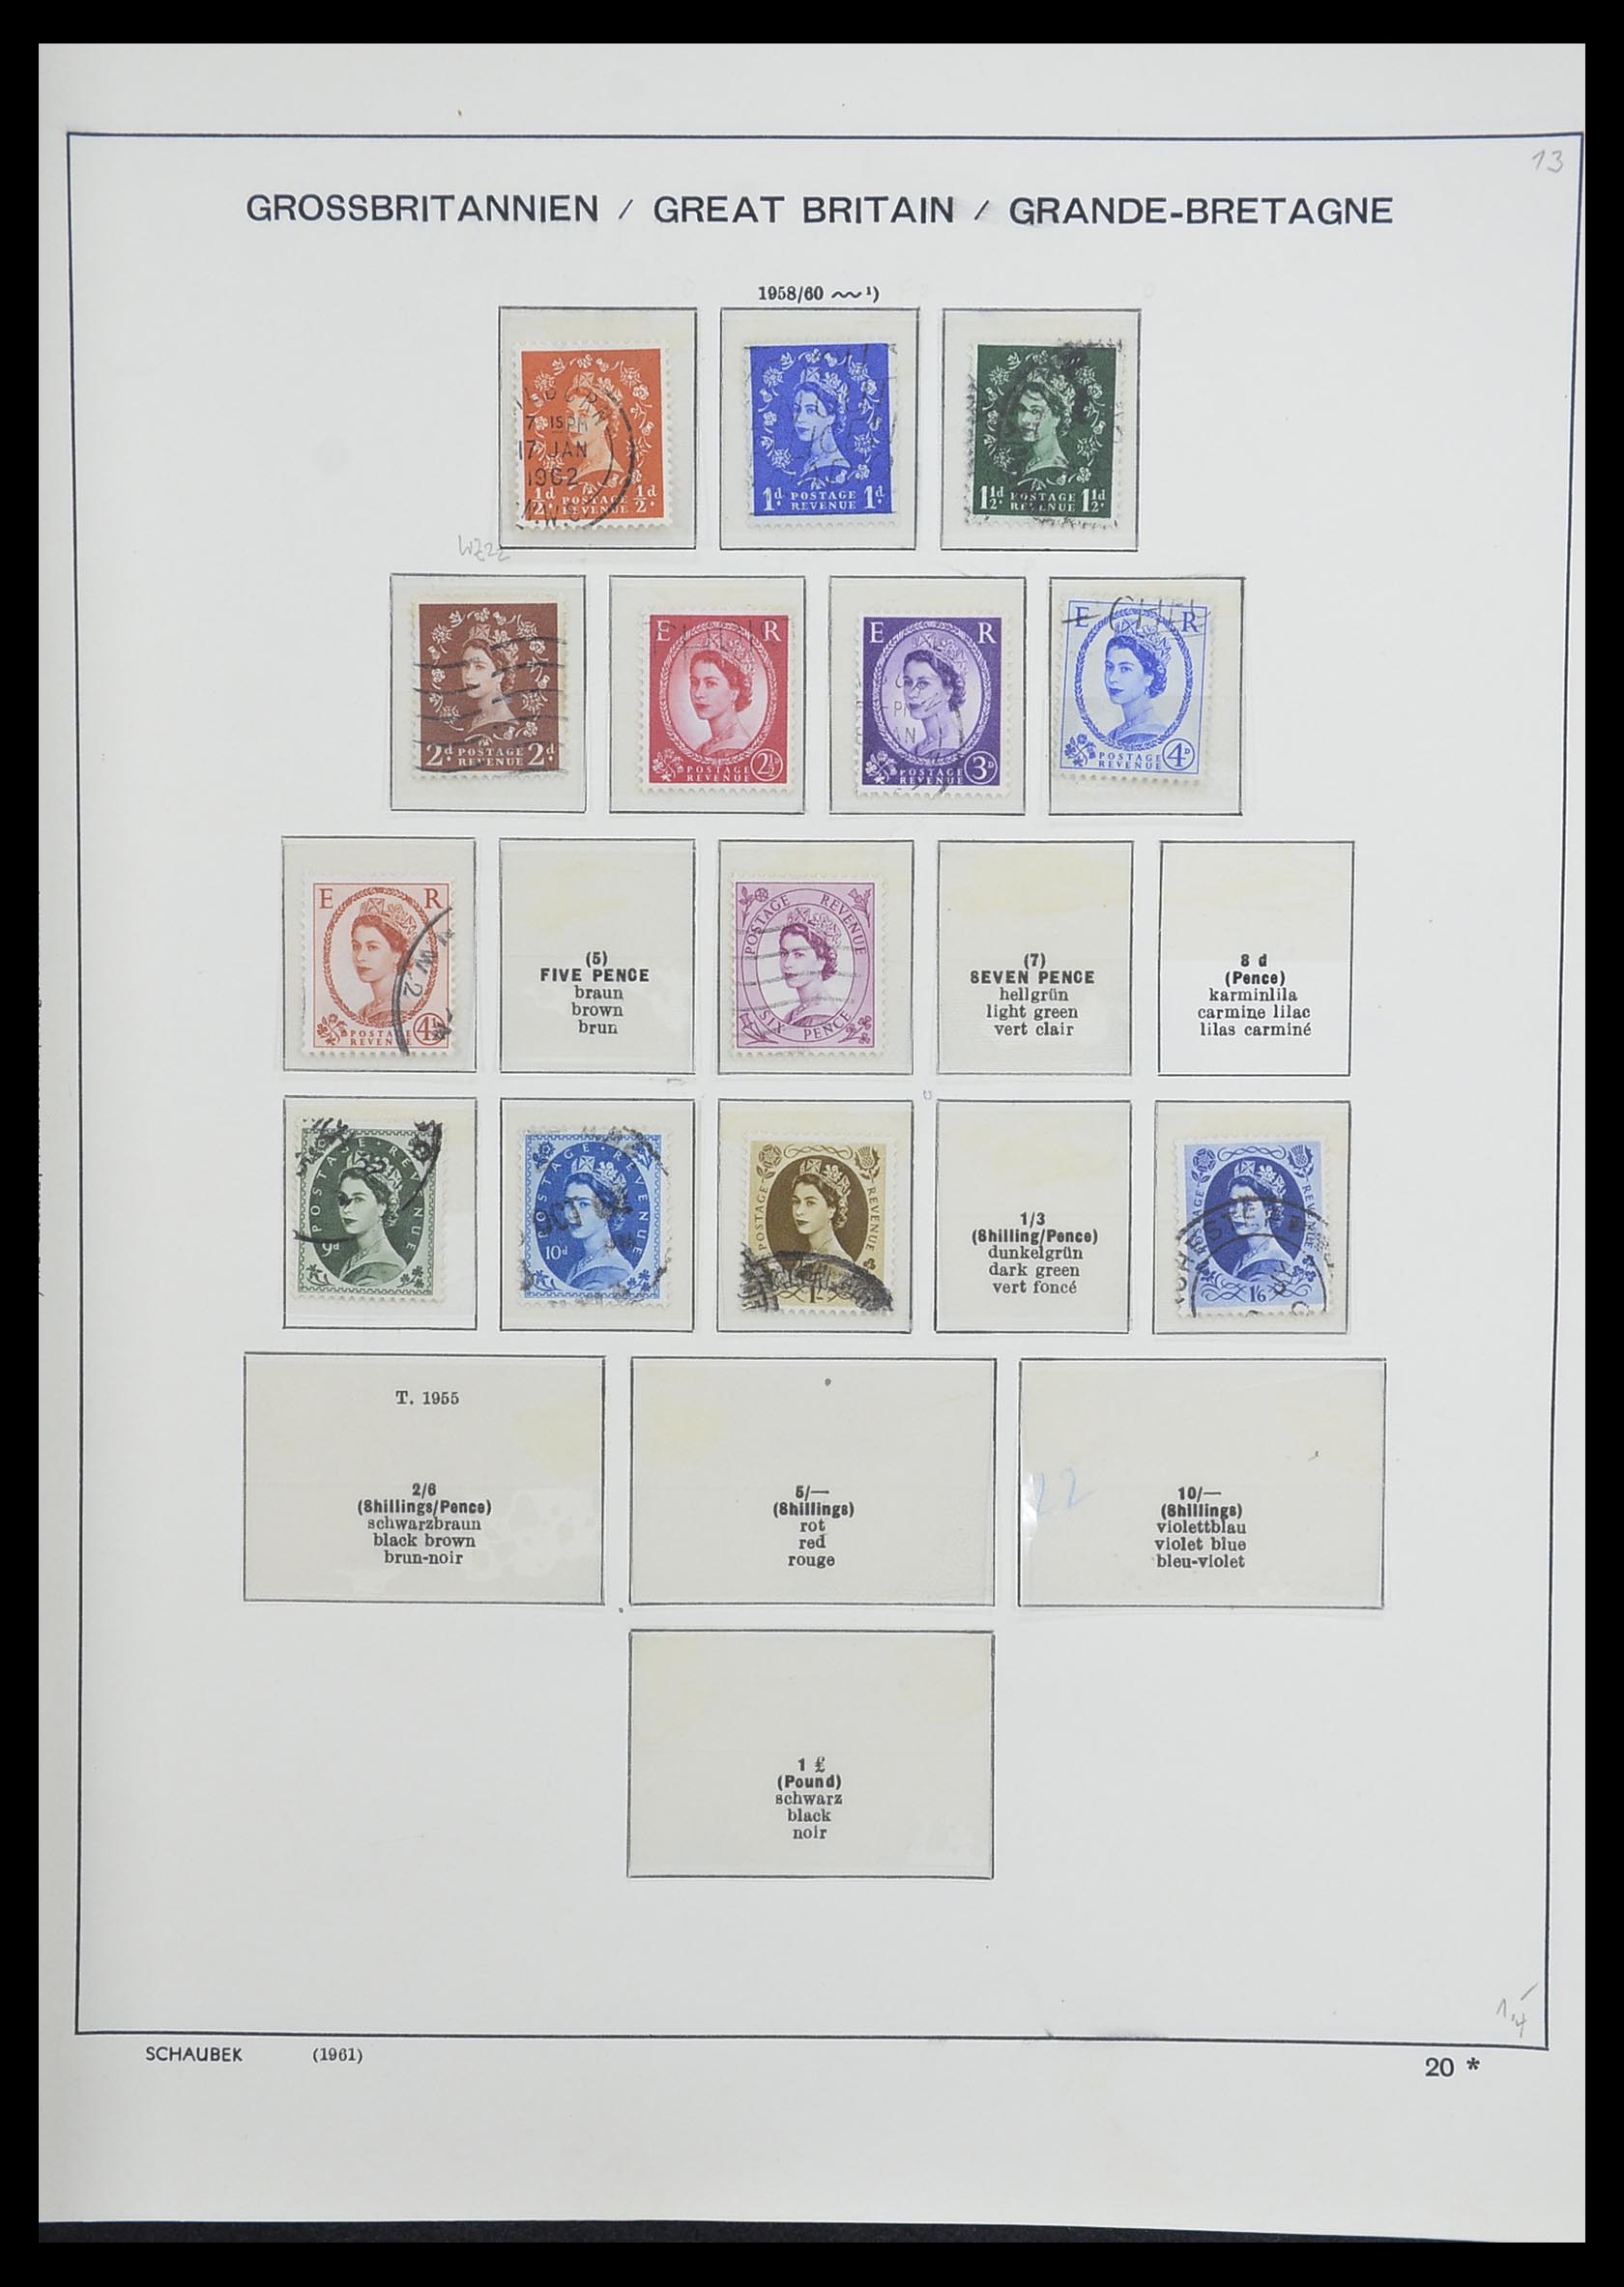 33250 023 - Stamp collection 33250 Great Britain 1841-1995.